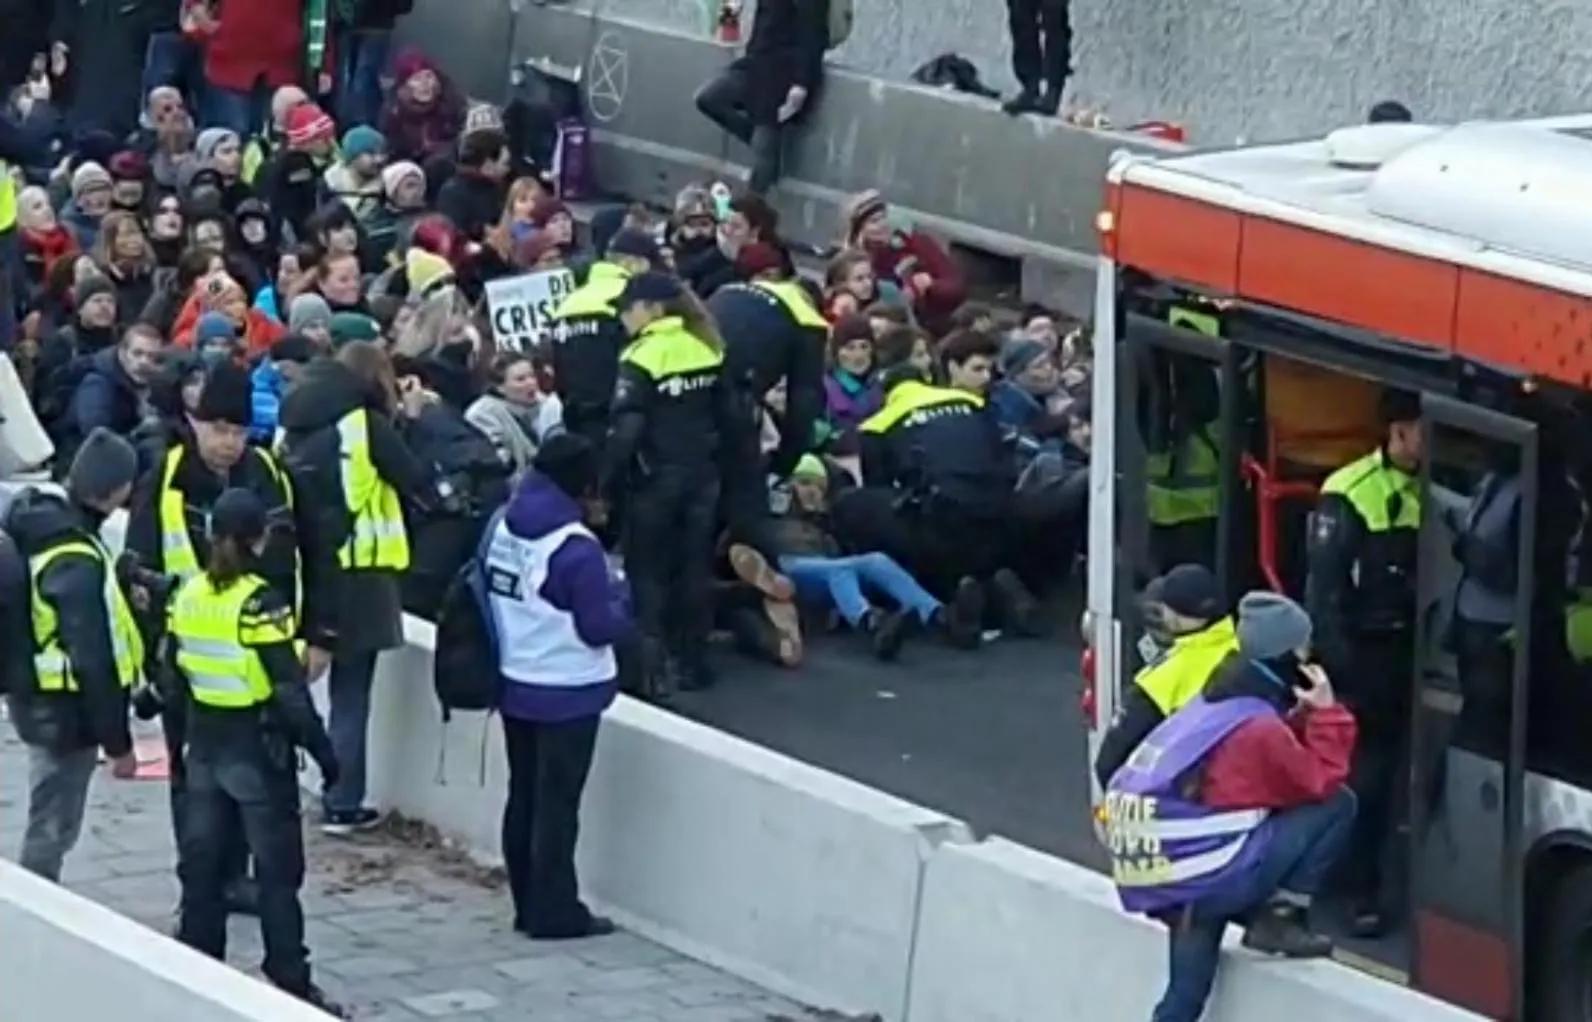 The picture is taken from a high angle. To the left is a crowd of people sitting on the ground in a tight group. Standing in front of them are about 5 cops. Two are trying to pull an activist out of the group. In the foreground to the right is the back of a bus with police officers and a photographer.